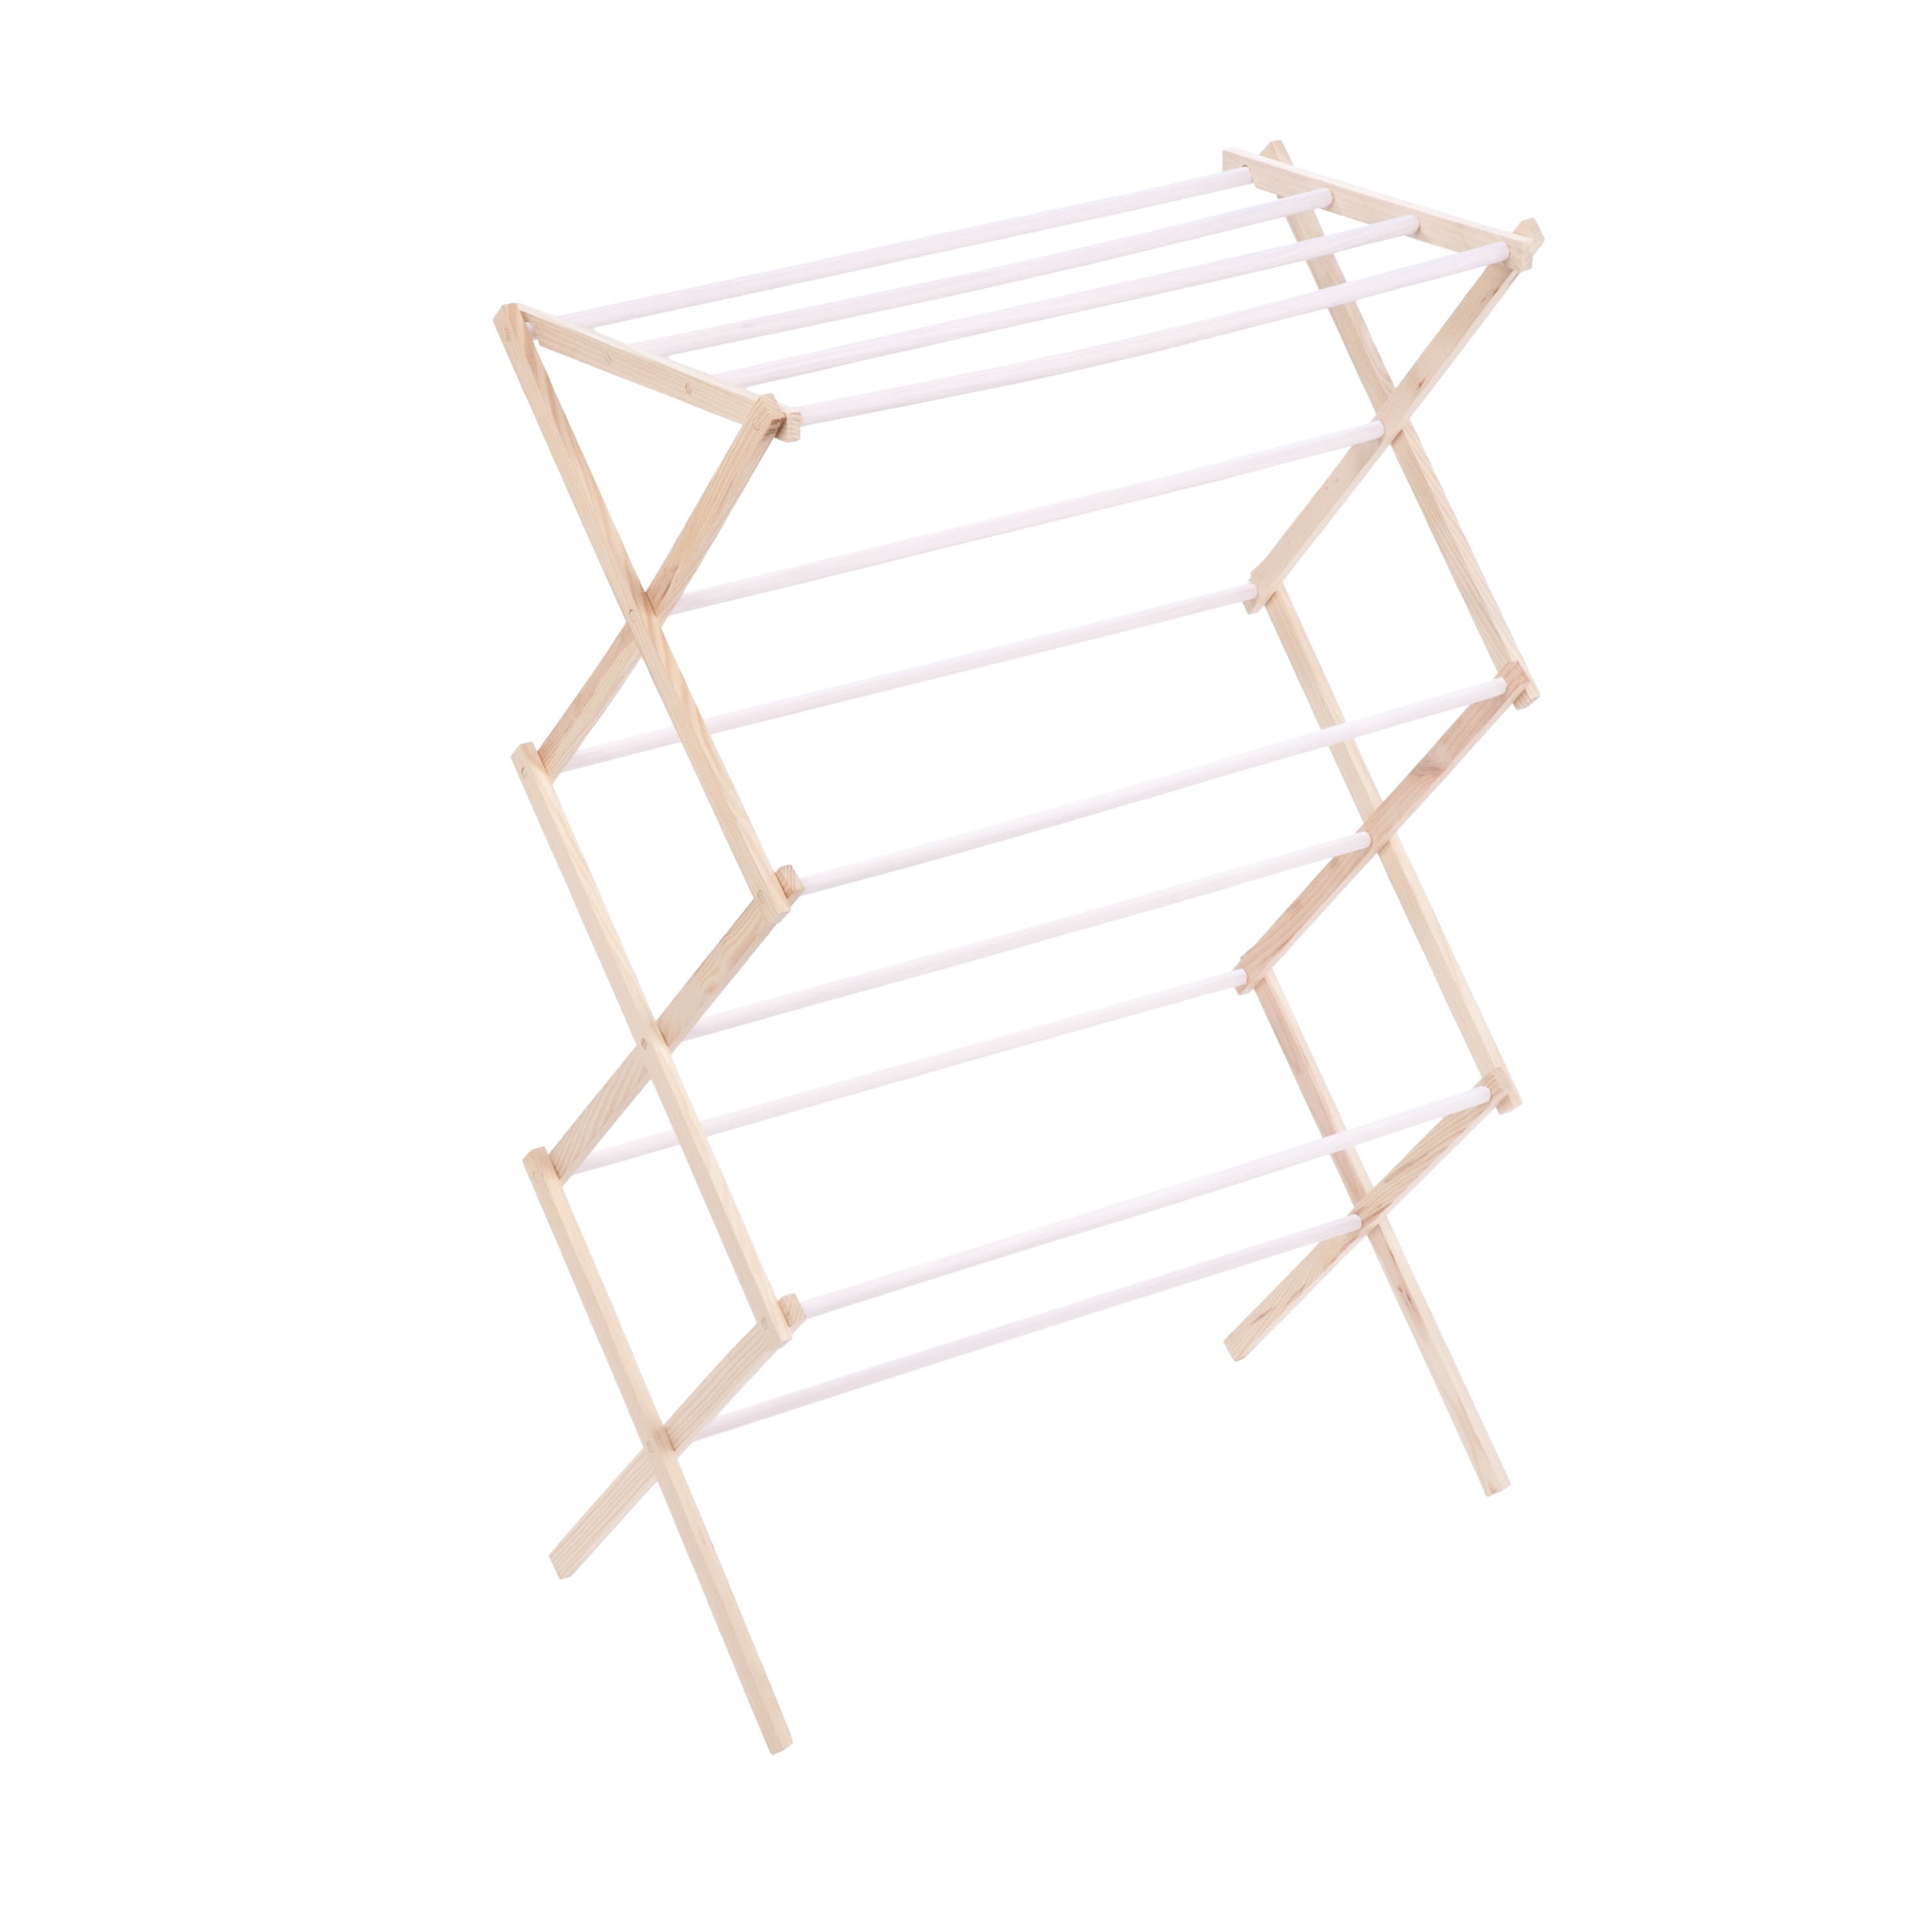 Wooden Clothes Drying Stand Folding Rack Foldable Indoor Laundry Dryer Hanger 